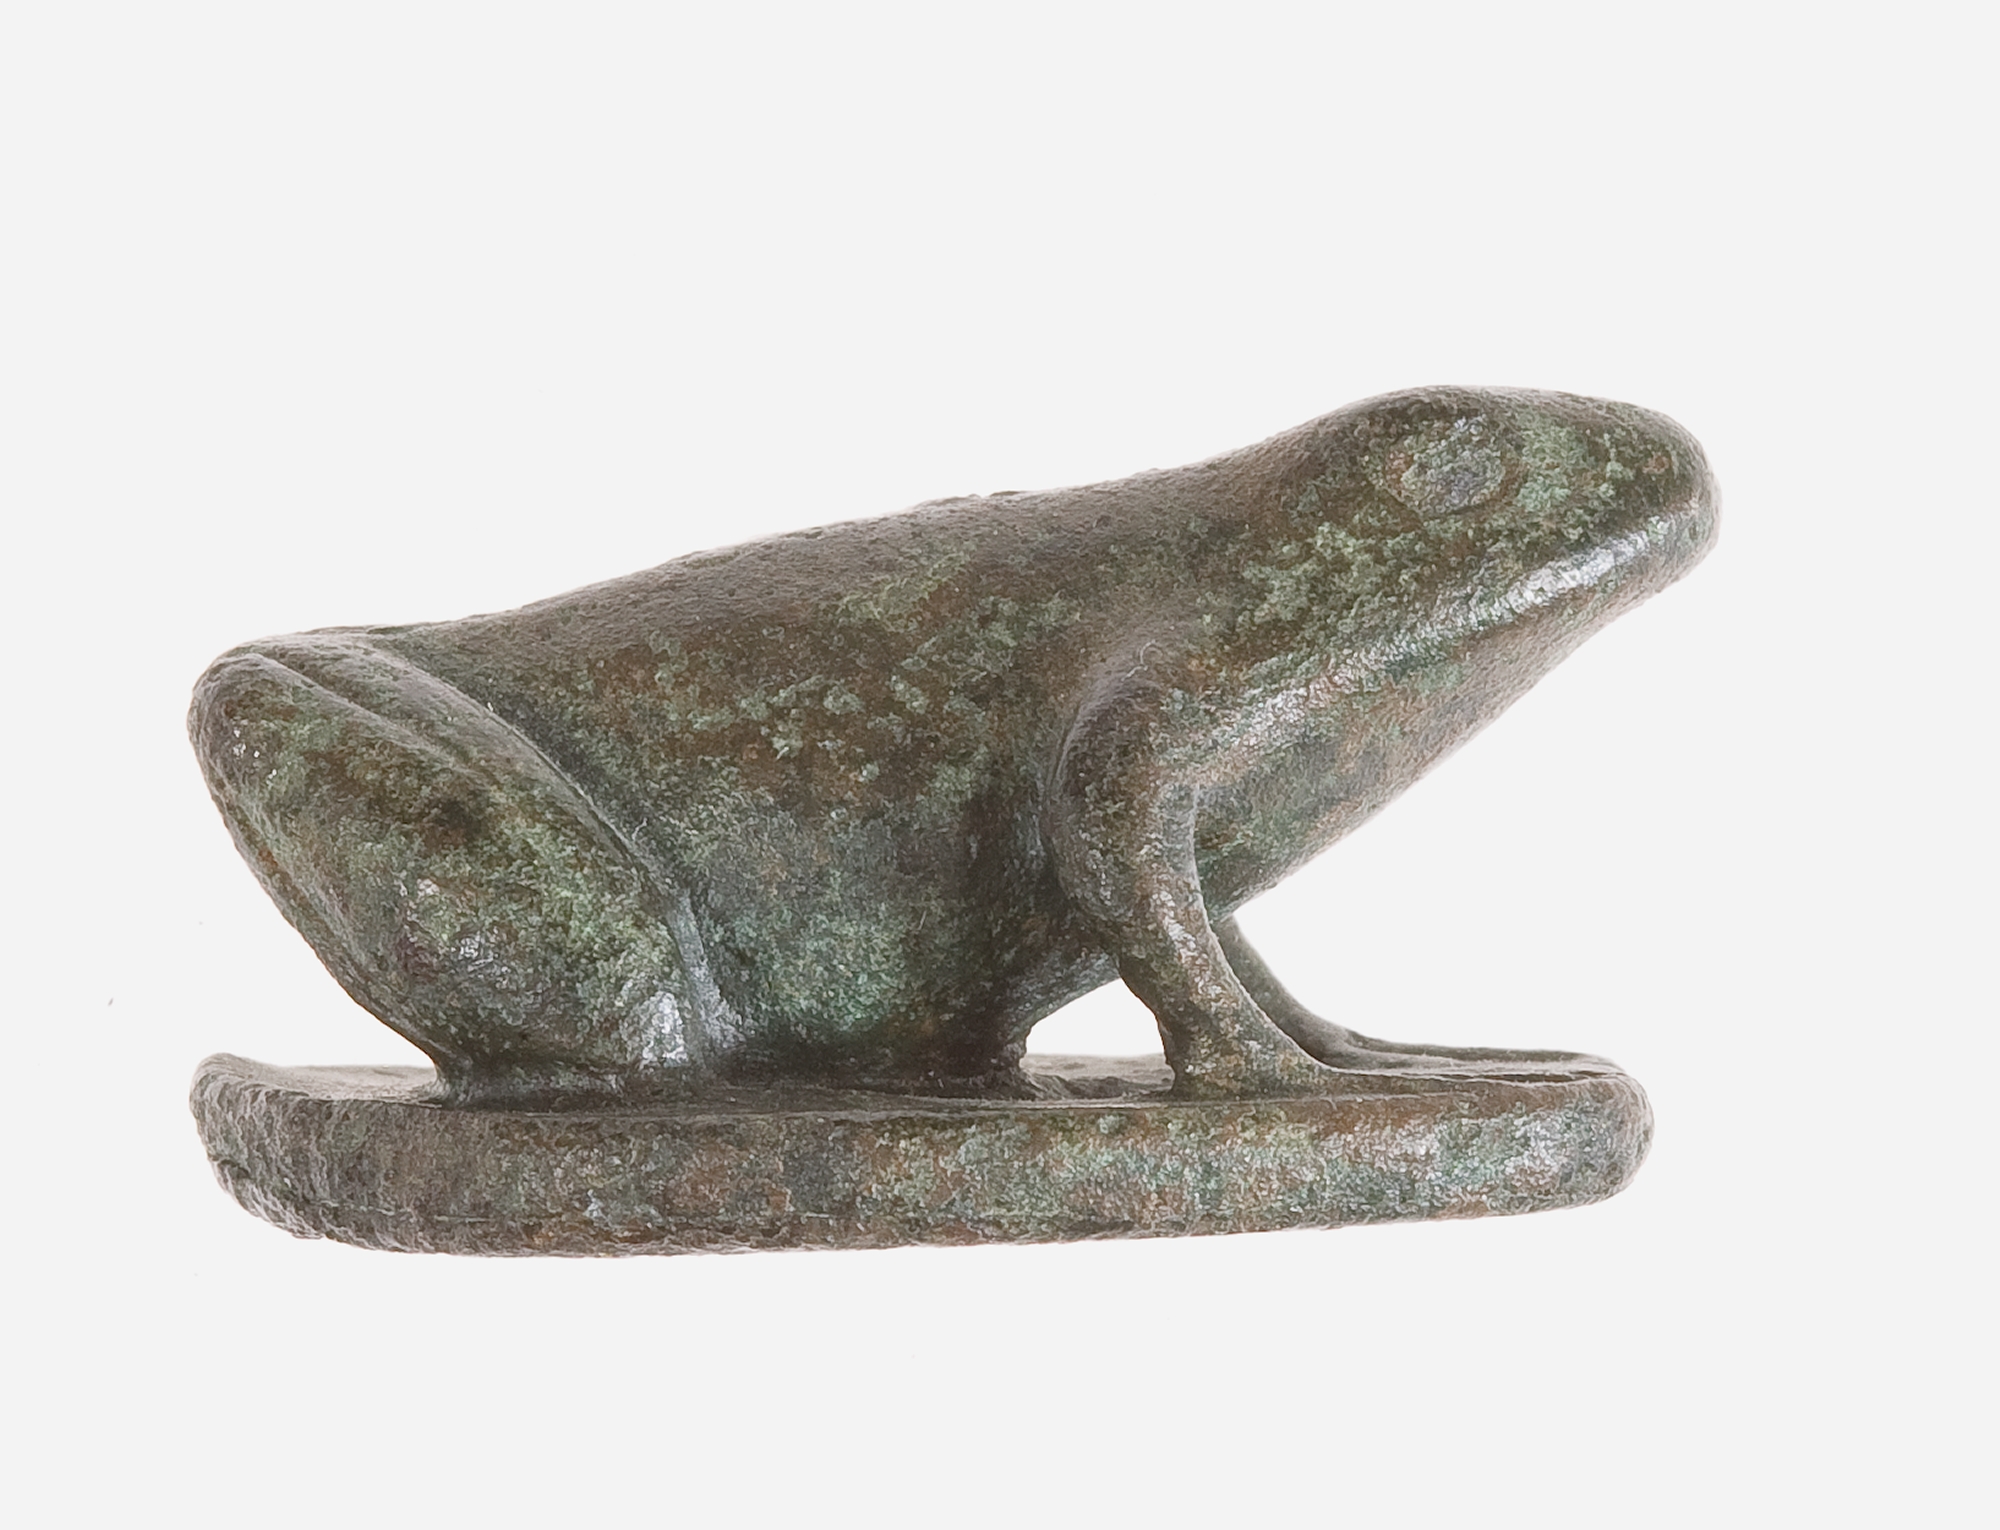 Frog on a lotus pad, perhaps a weight | New Kingdom | The Metropolitan ...